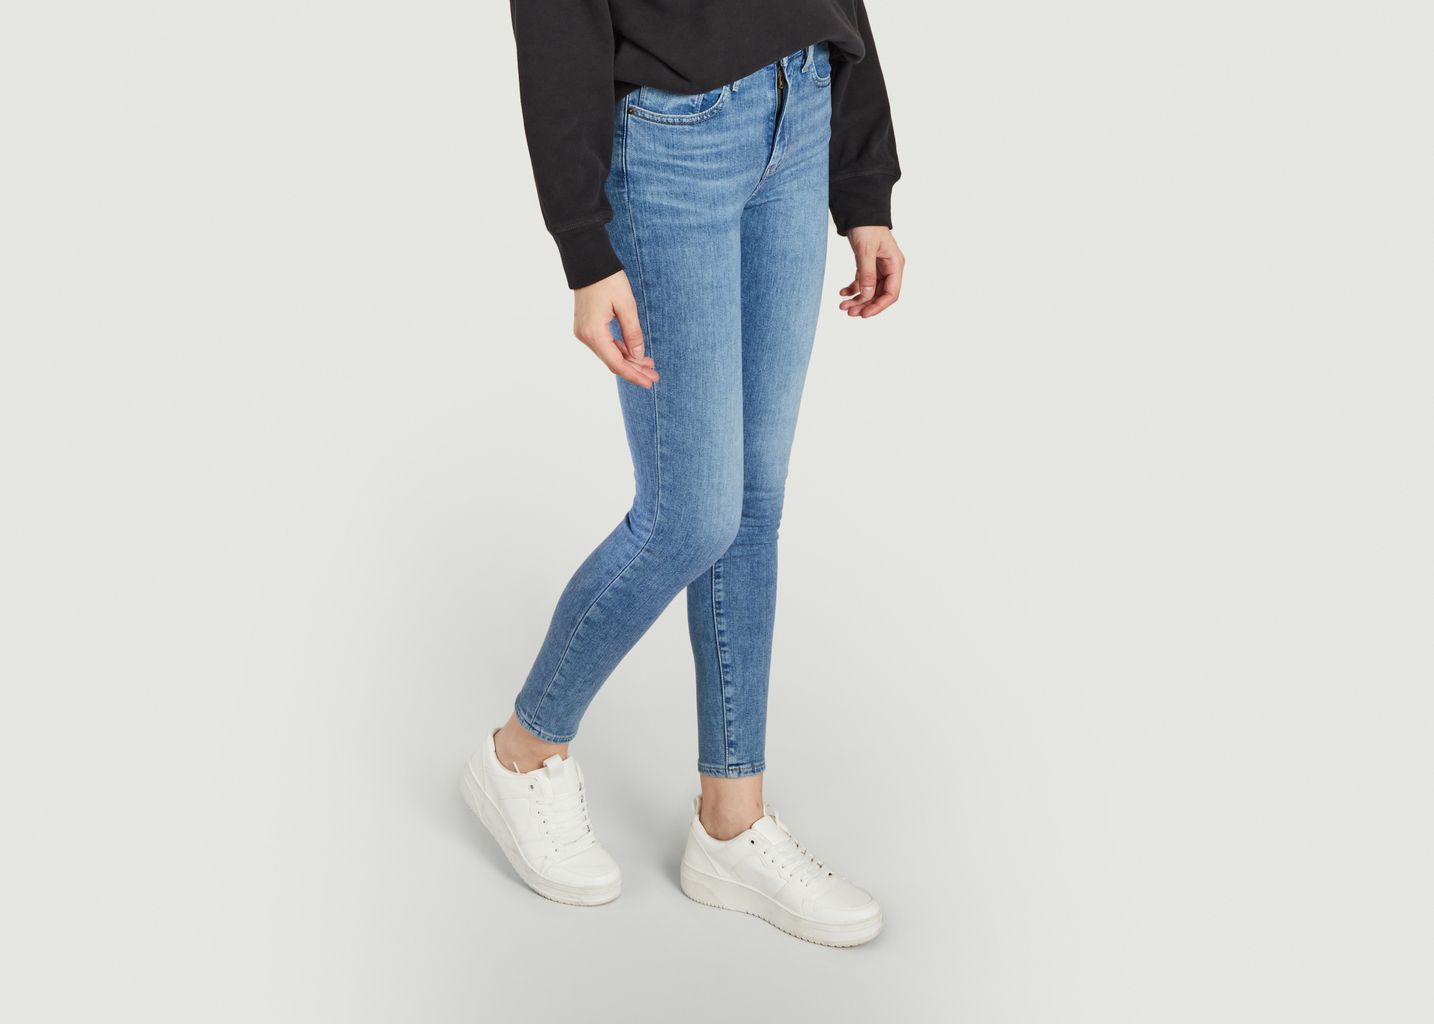 721 High Rise Skinny Jeans - Levi's Red Tab